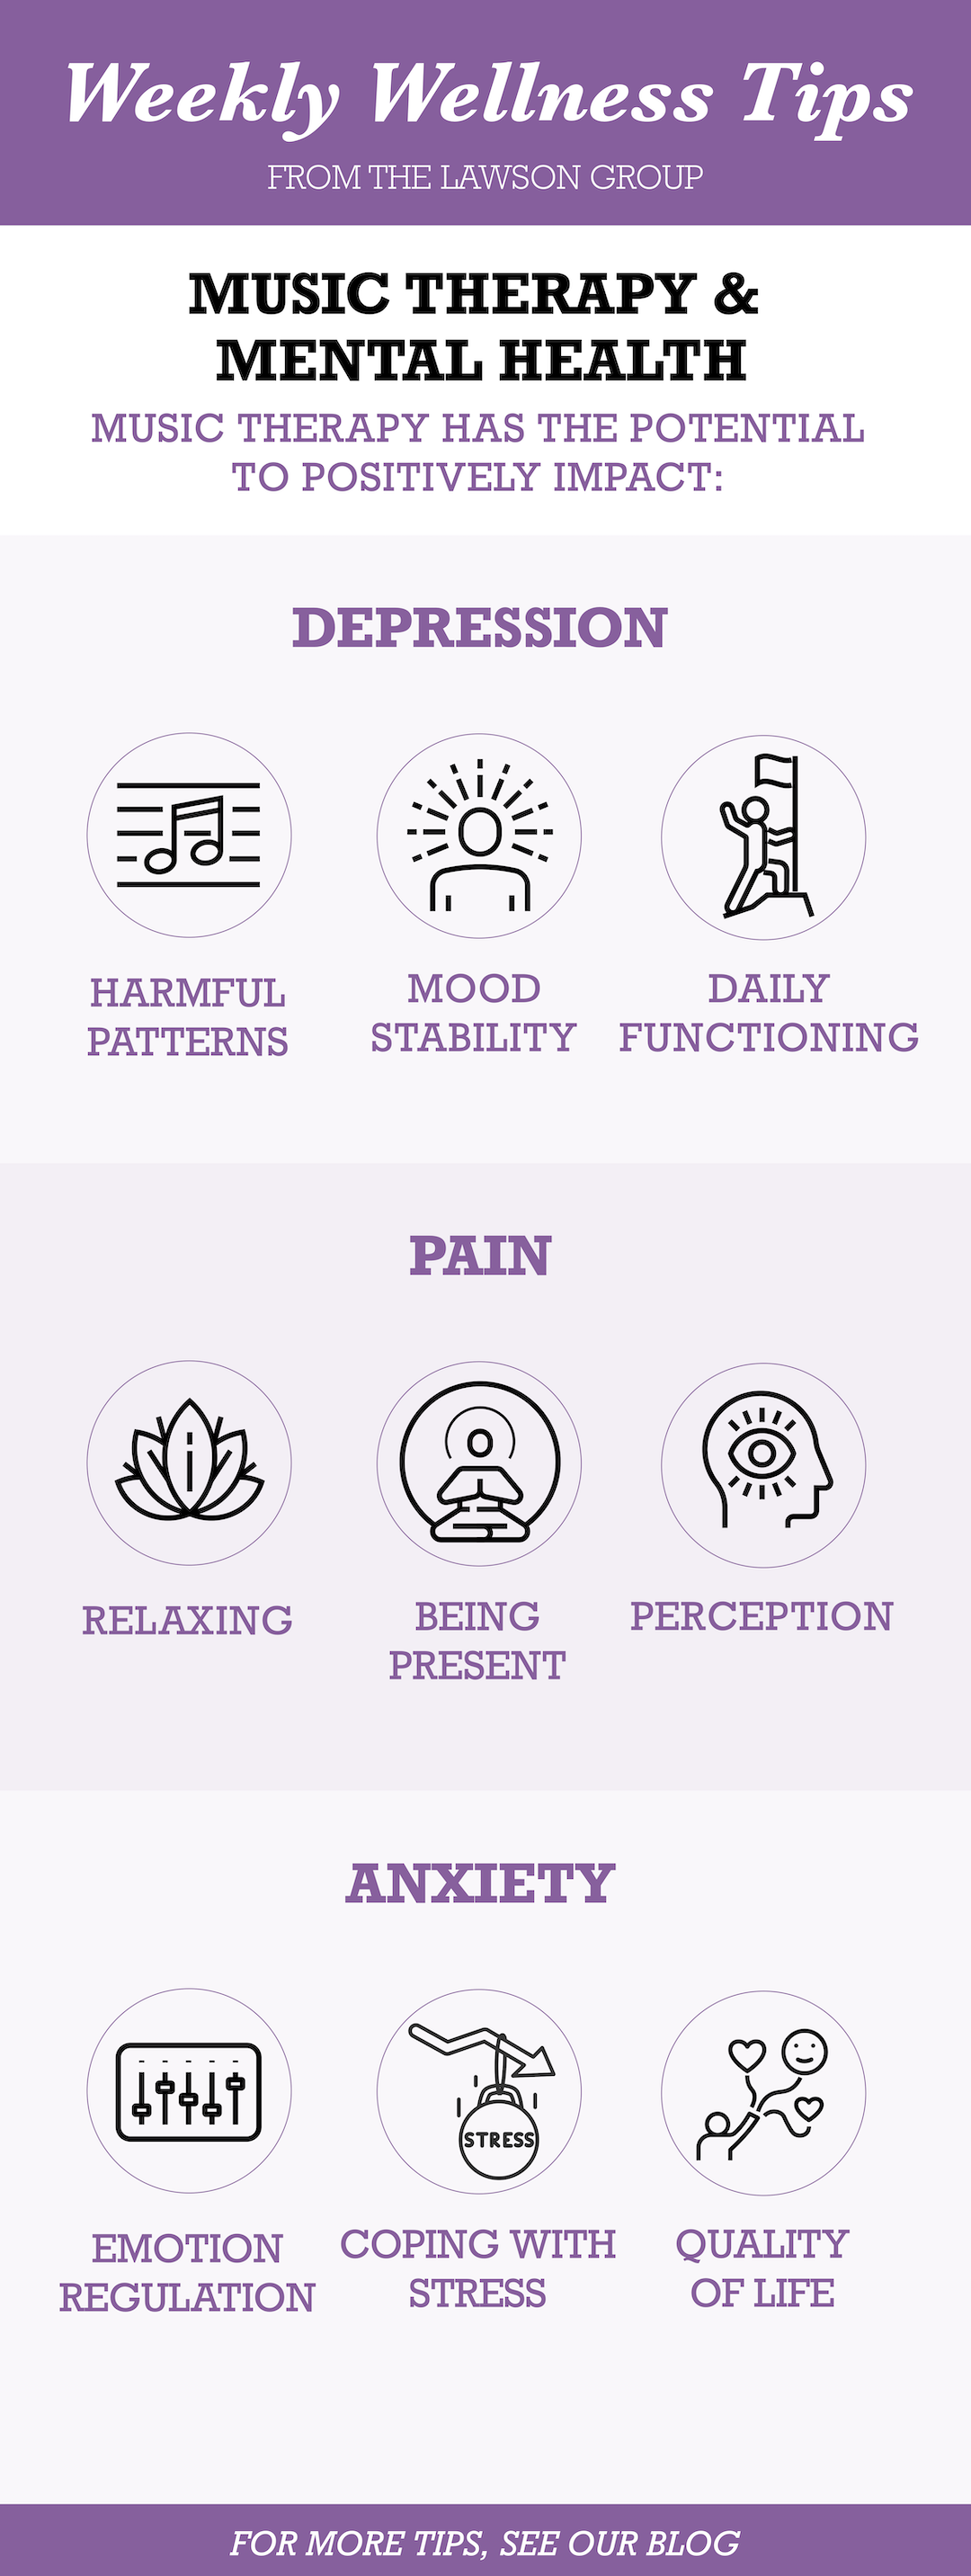 TLG22005 Wellness Tips  Music Therapy  Infographic-1080px